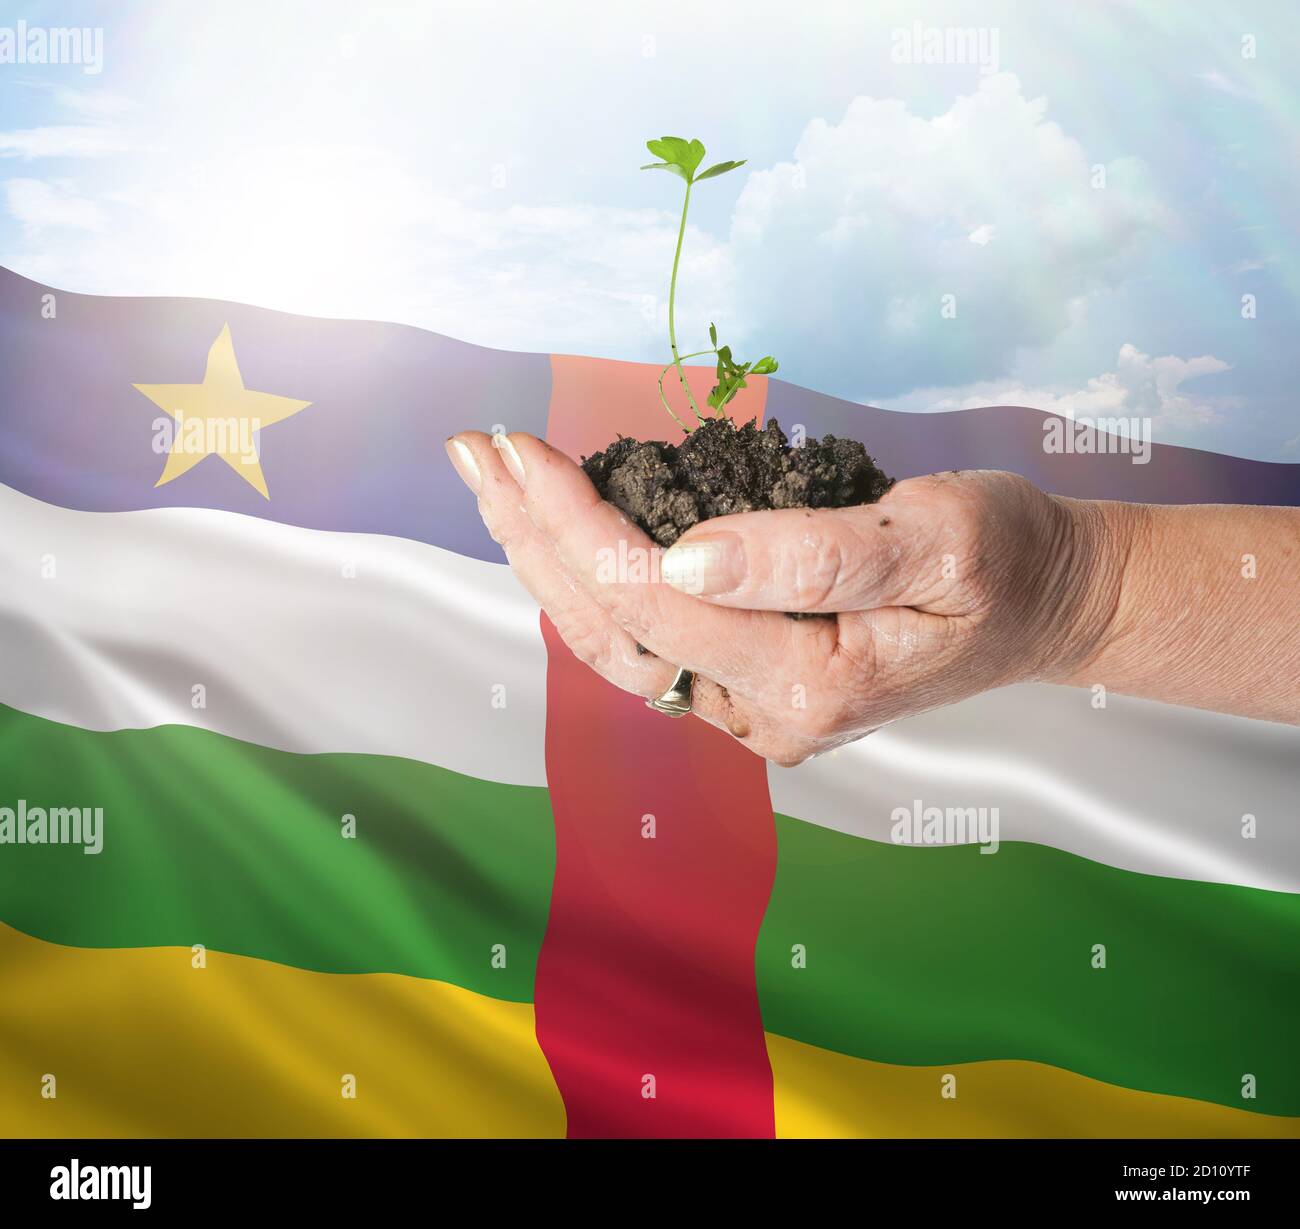 Central African Republic growth and new beginning. Green renewable energy and ecology concept. Hand holding young plant. Stock Photo